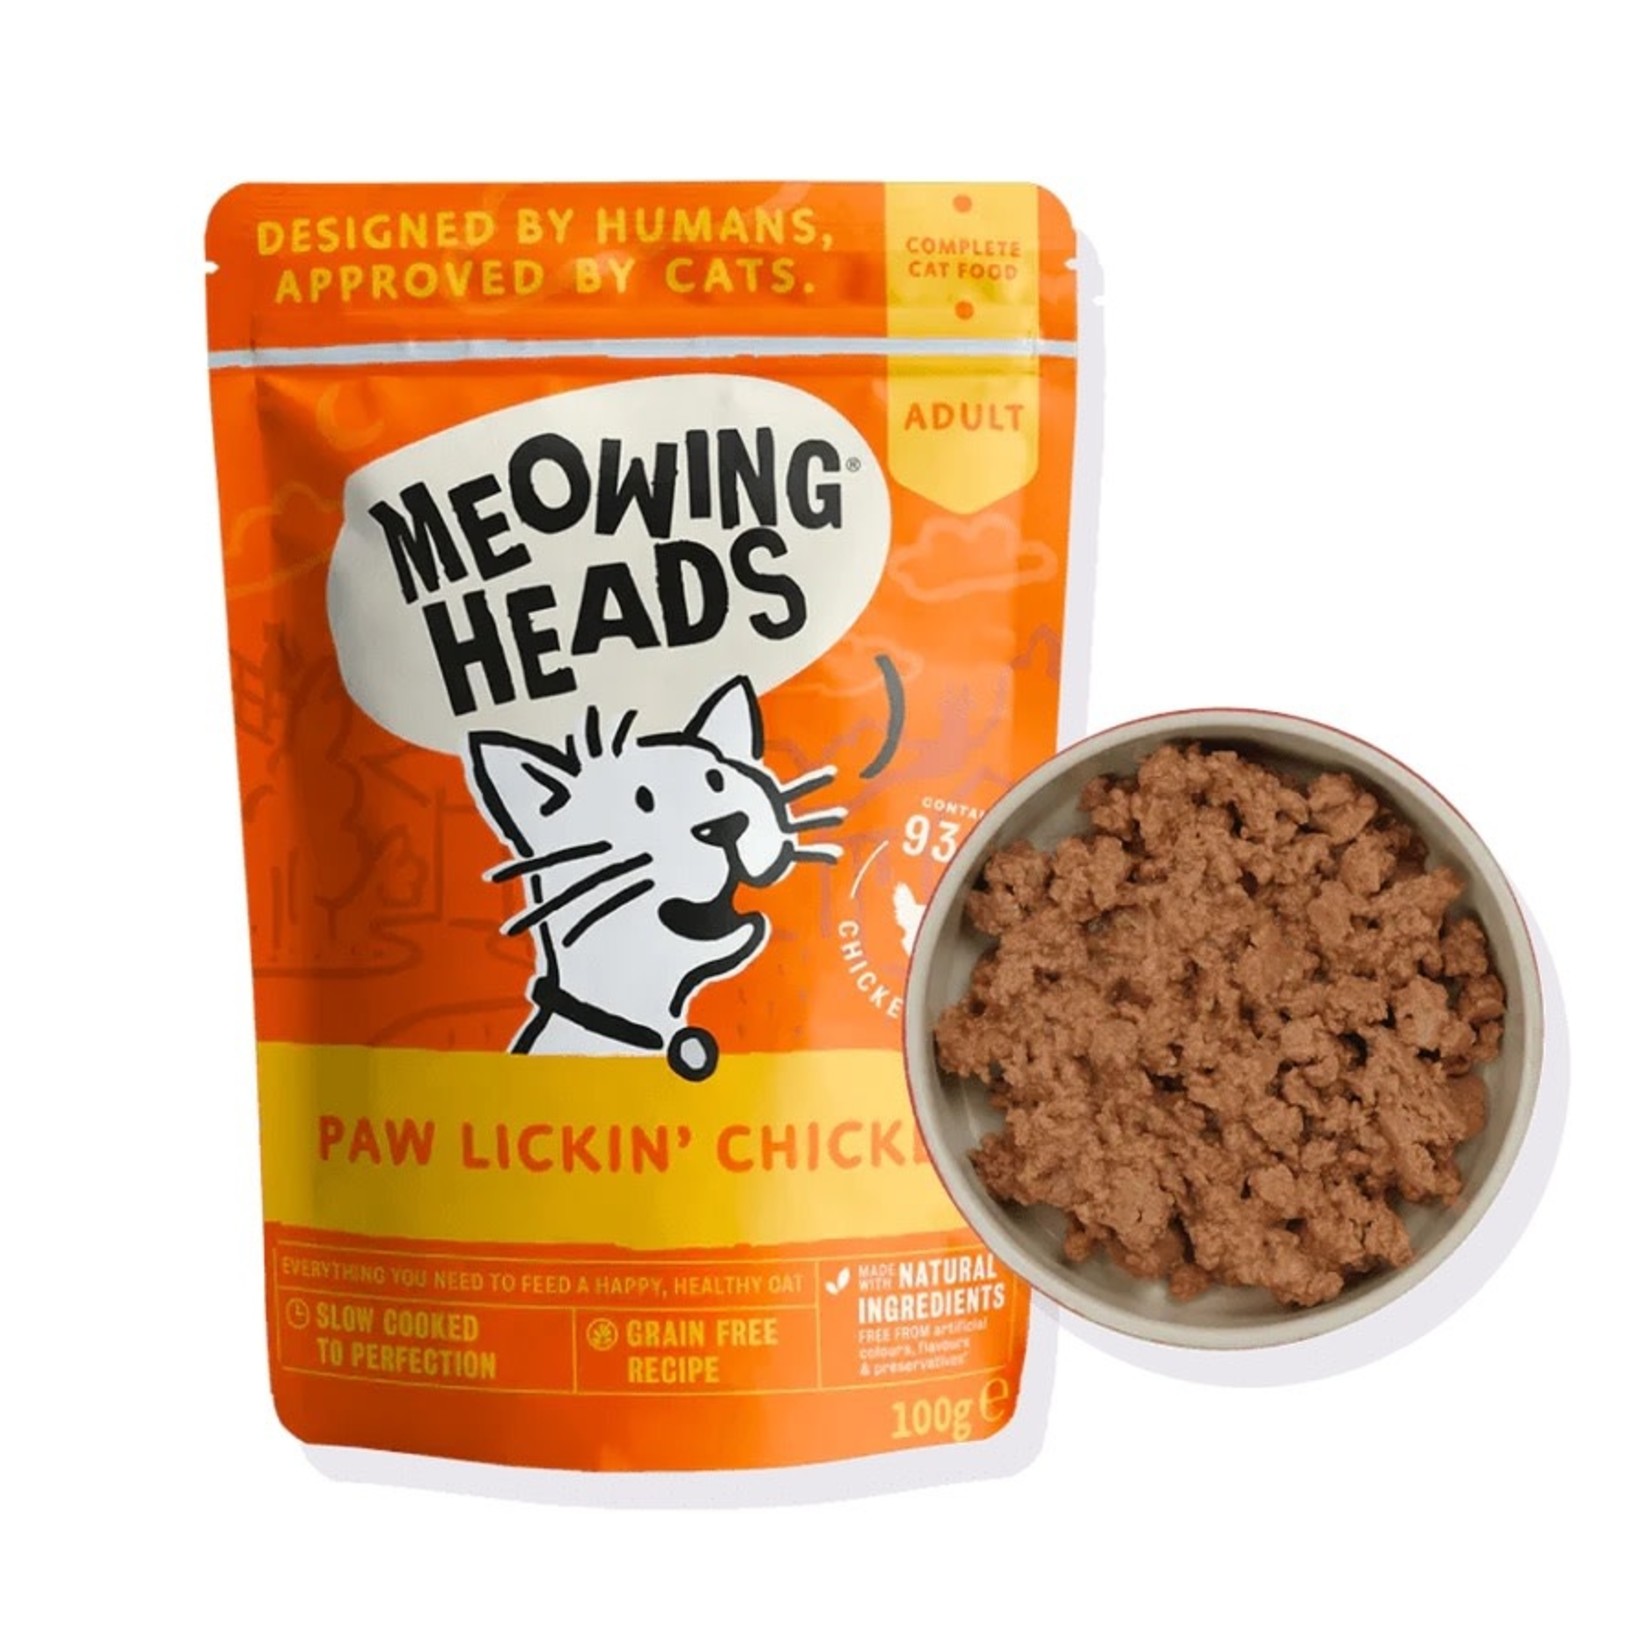 Meowing Heads Paw Lickin’ Chicken Adult Cat Wet Food, 10 x 100g